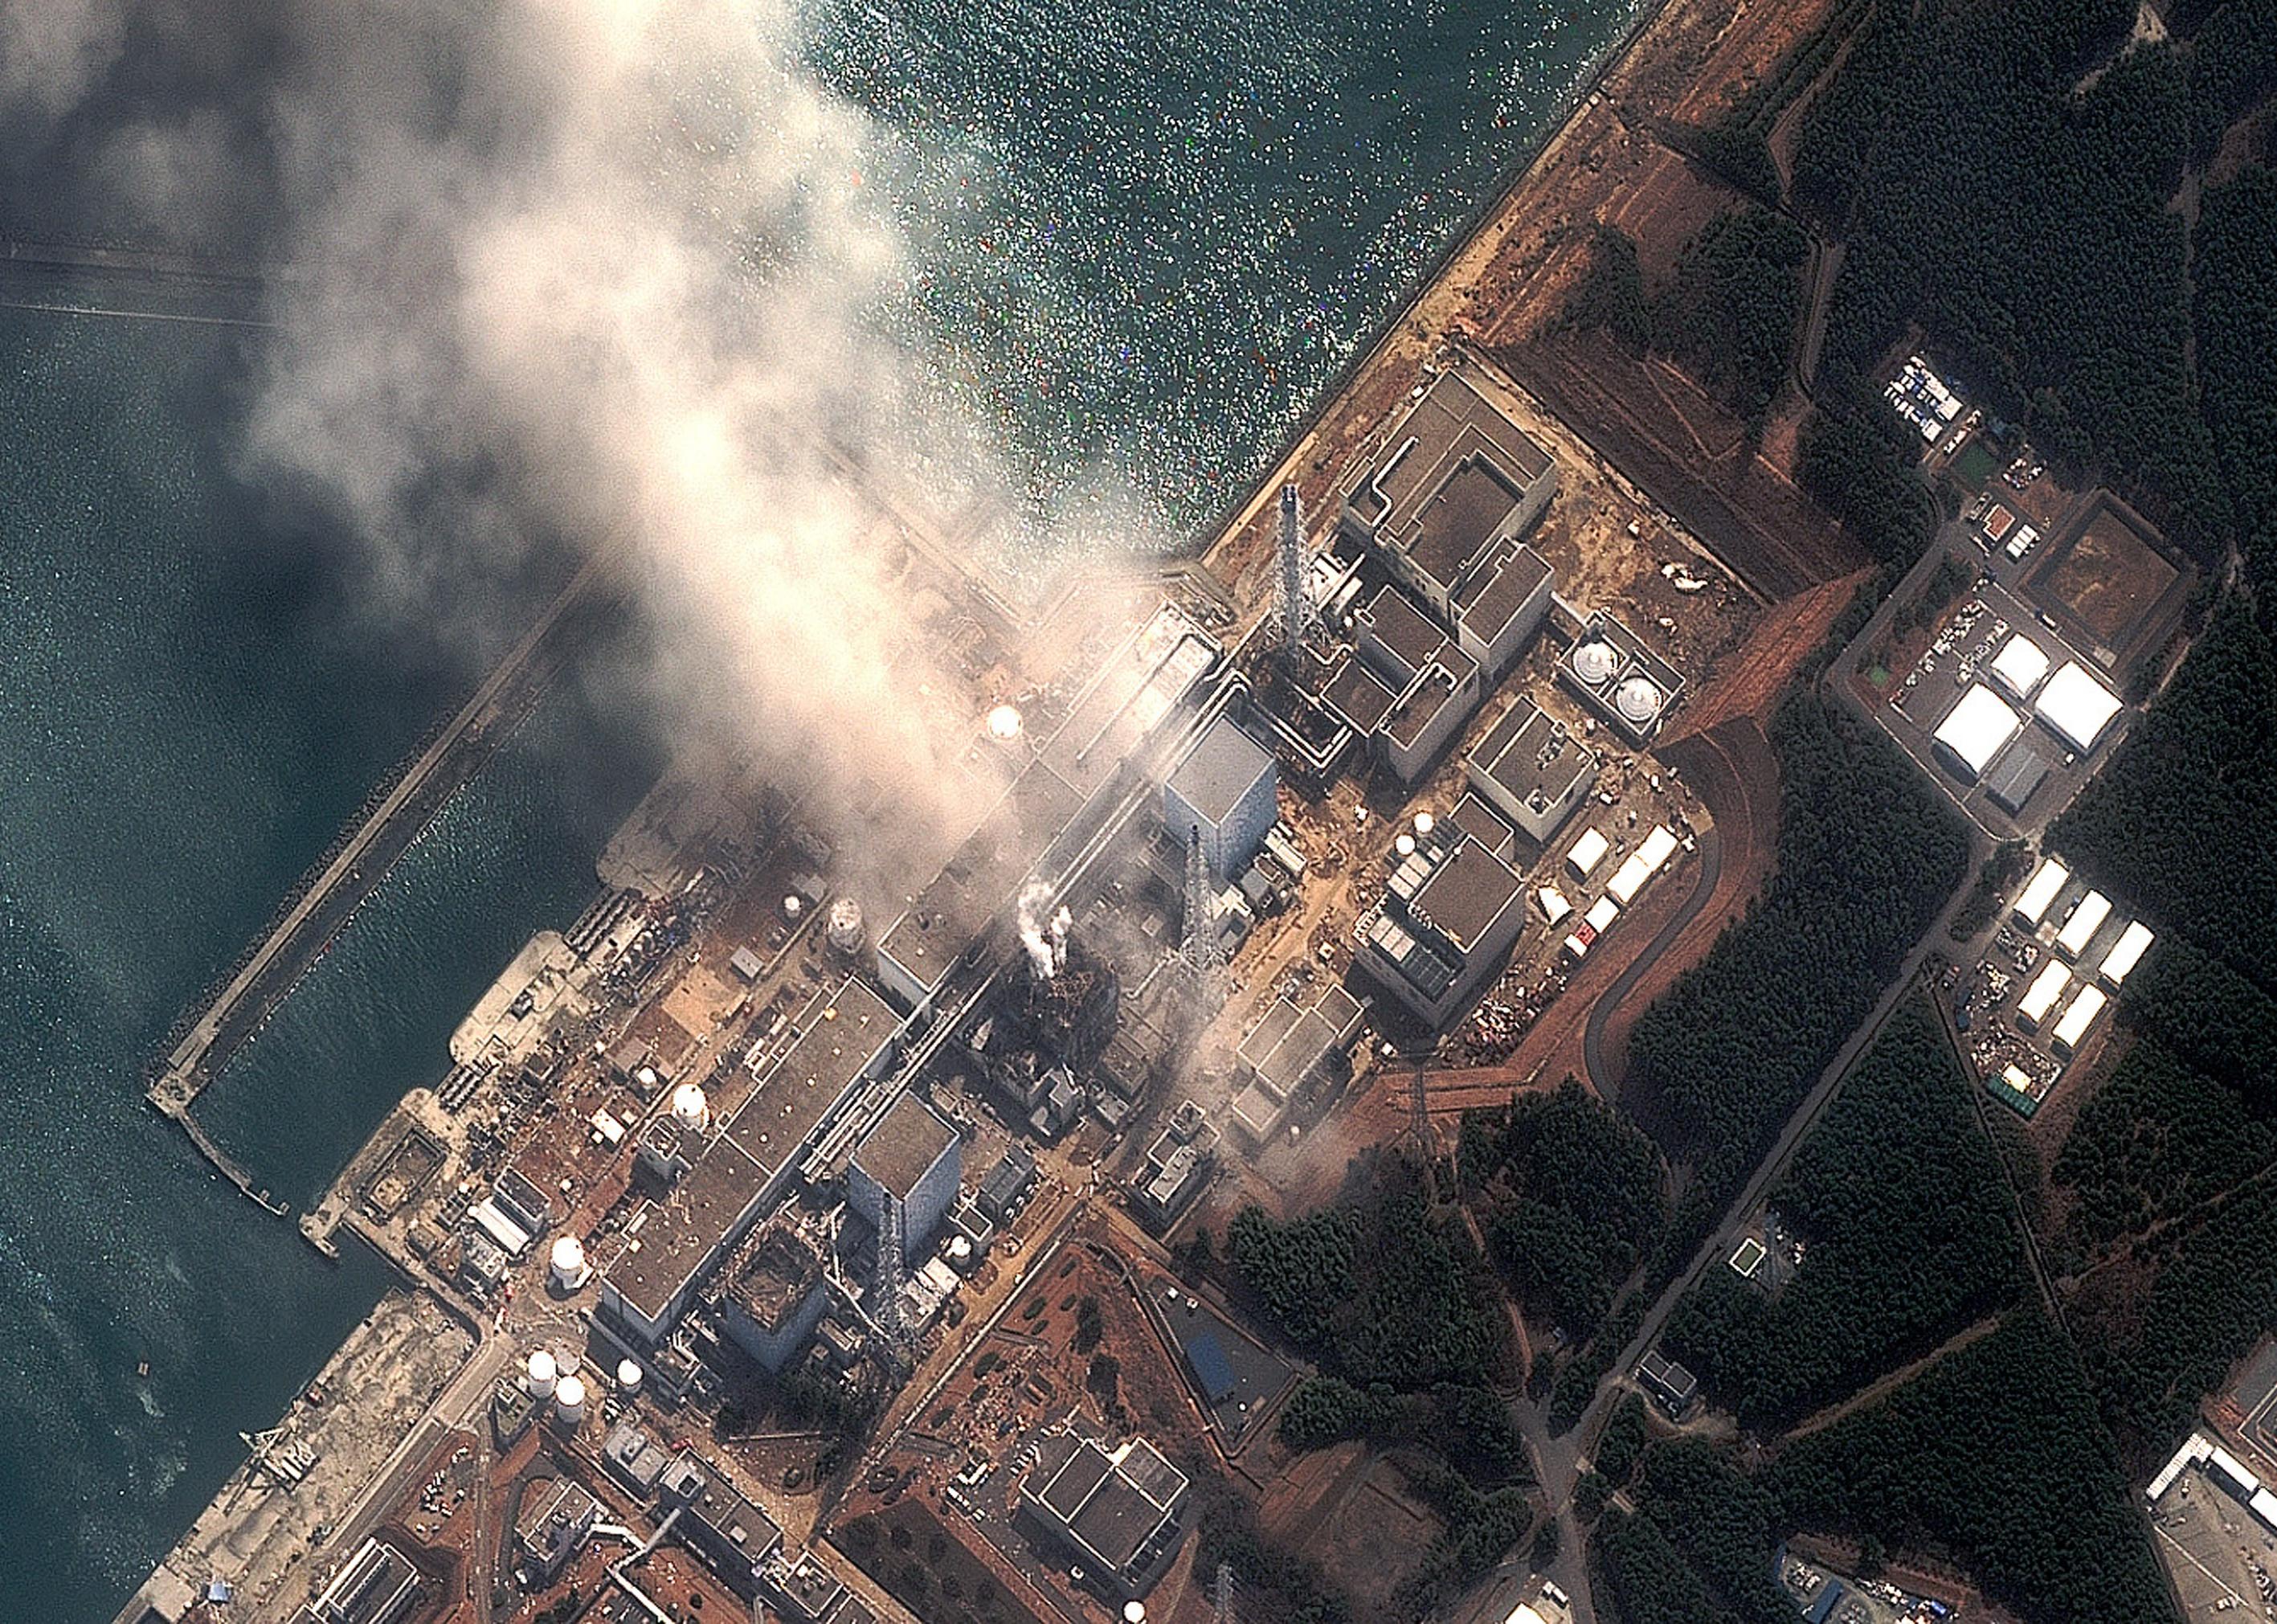 The Fukushima Daiichi Nuclear Power plant after the earthquake and subsequent tsunami.